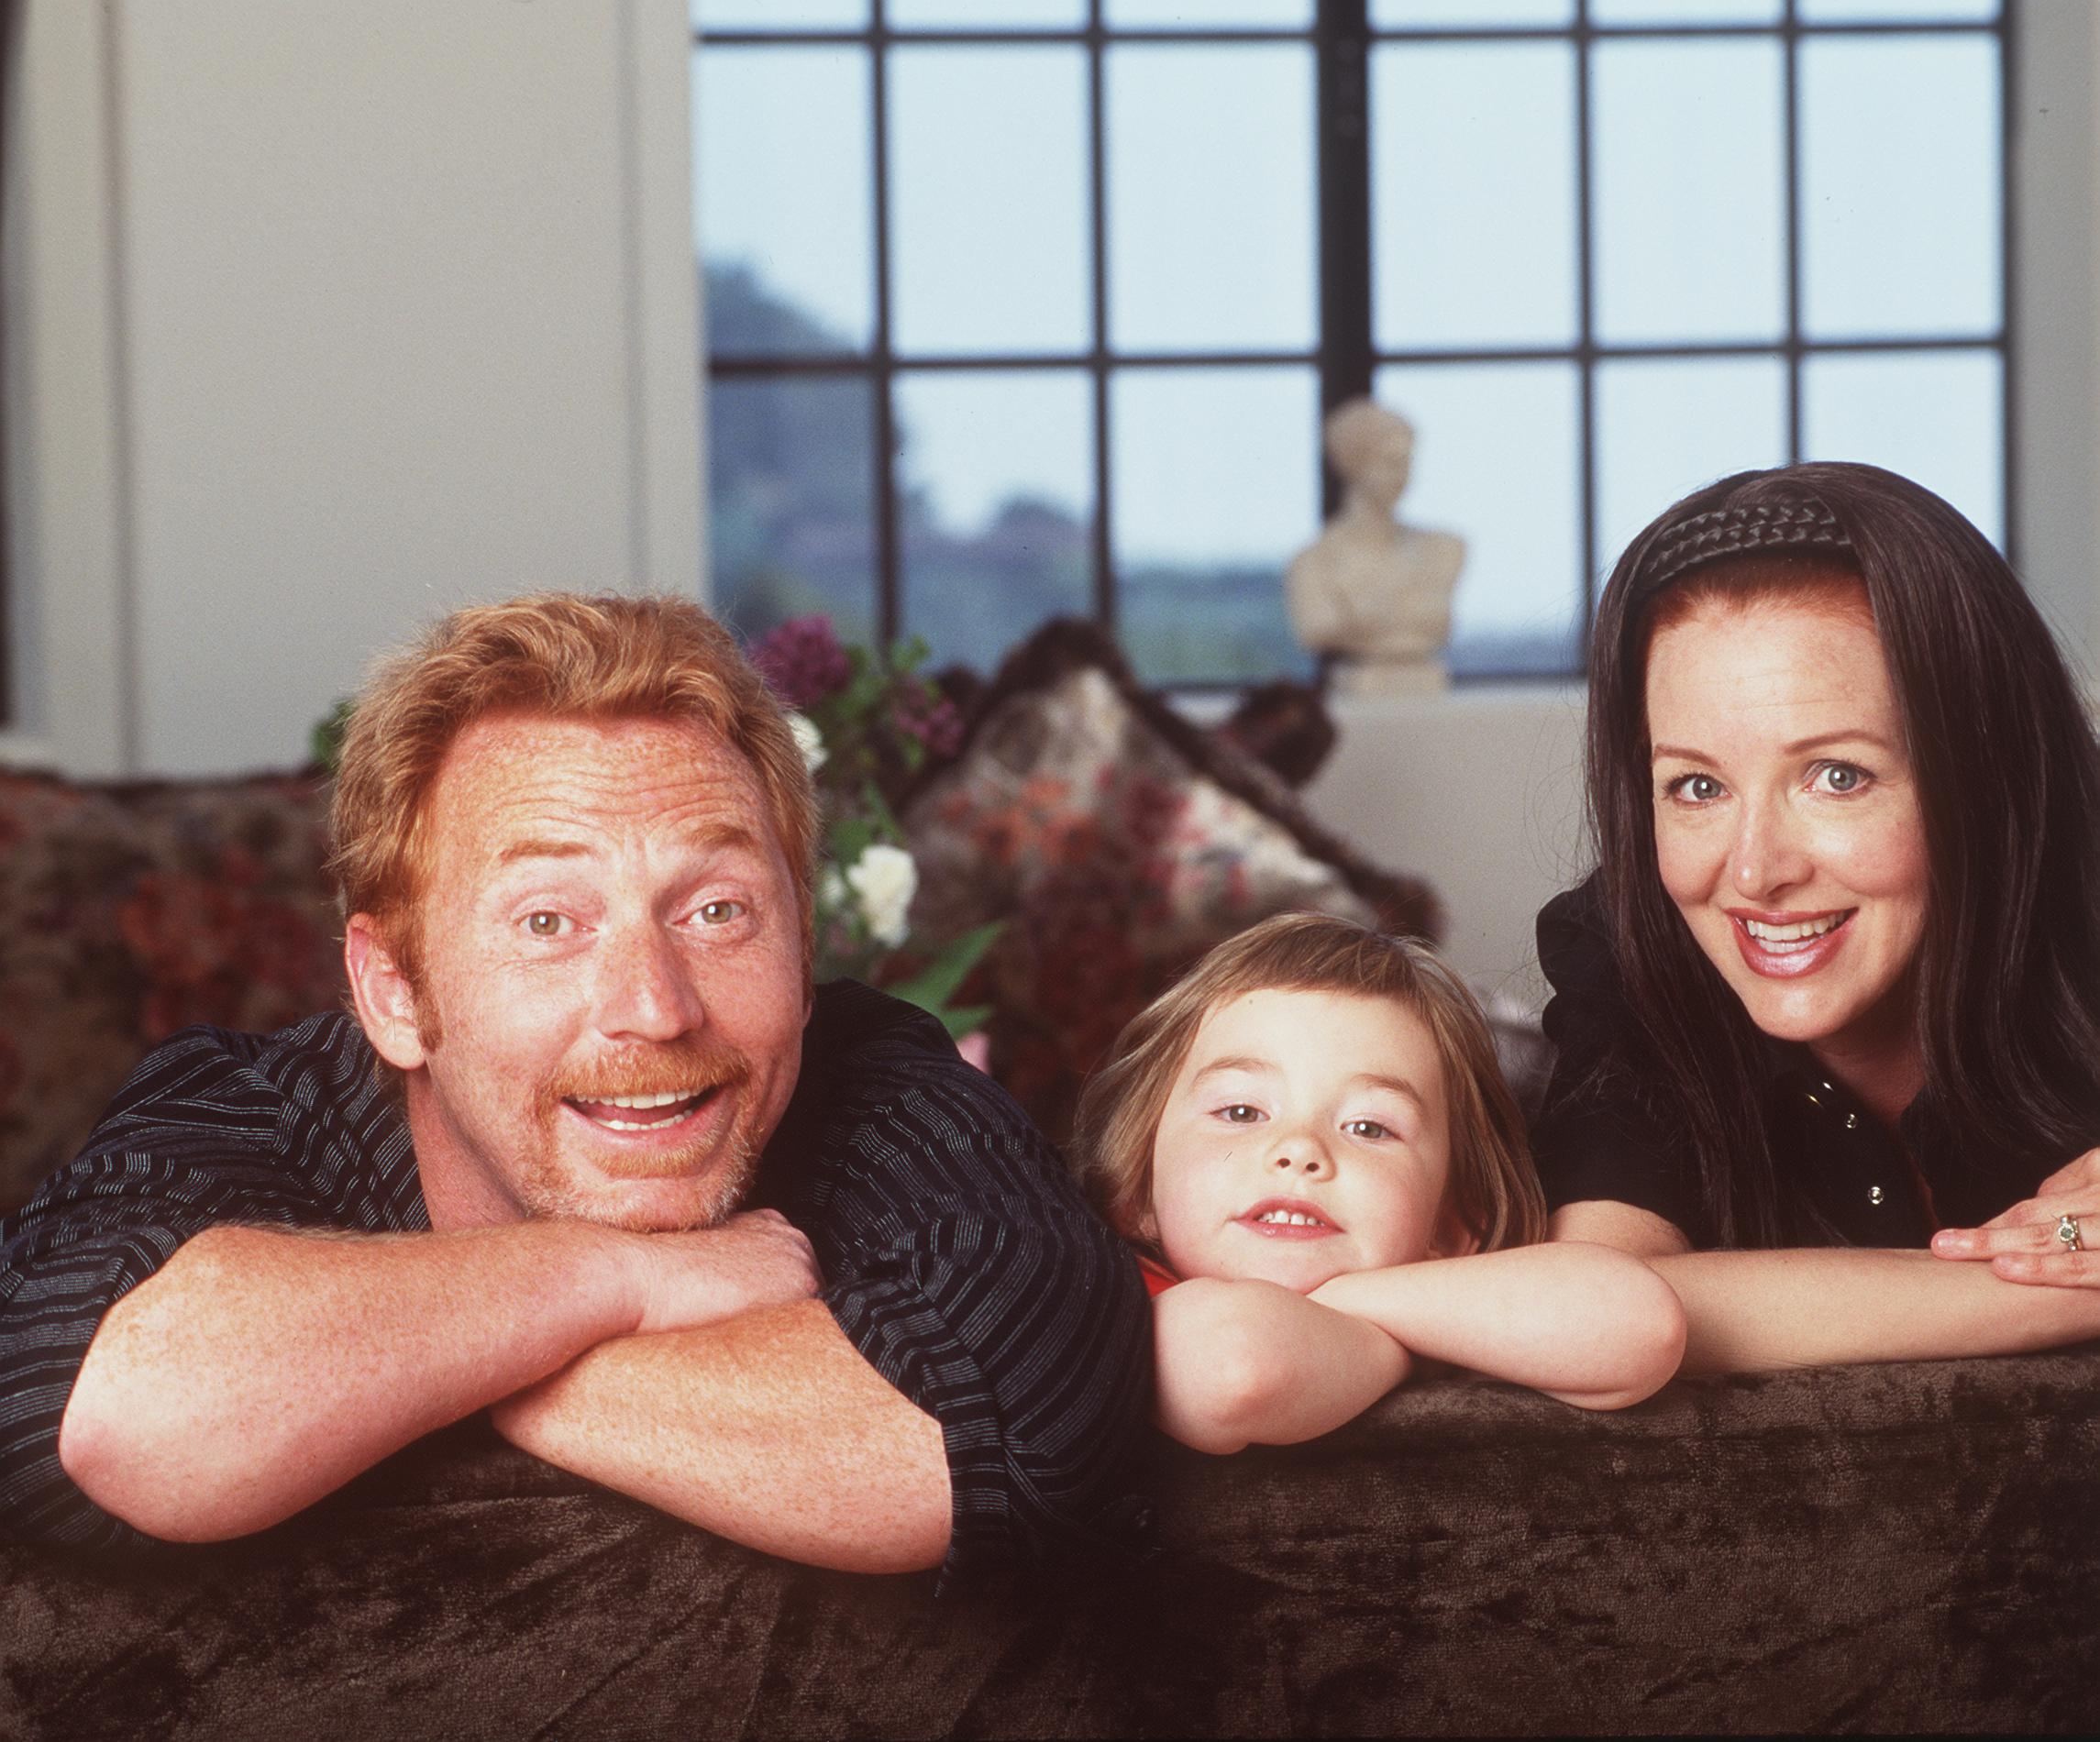 Danny Bonaduce pictured with his wife, Gretchen Bonaduce and daughter, Isabella at their new home on July 8, 1999 in Hollywood Hills, California | Source: Getty Images